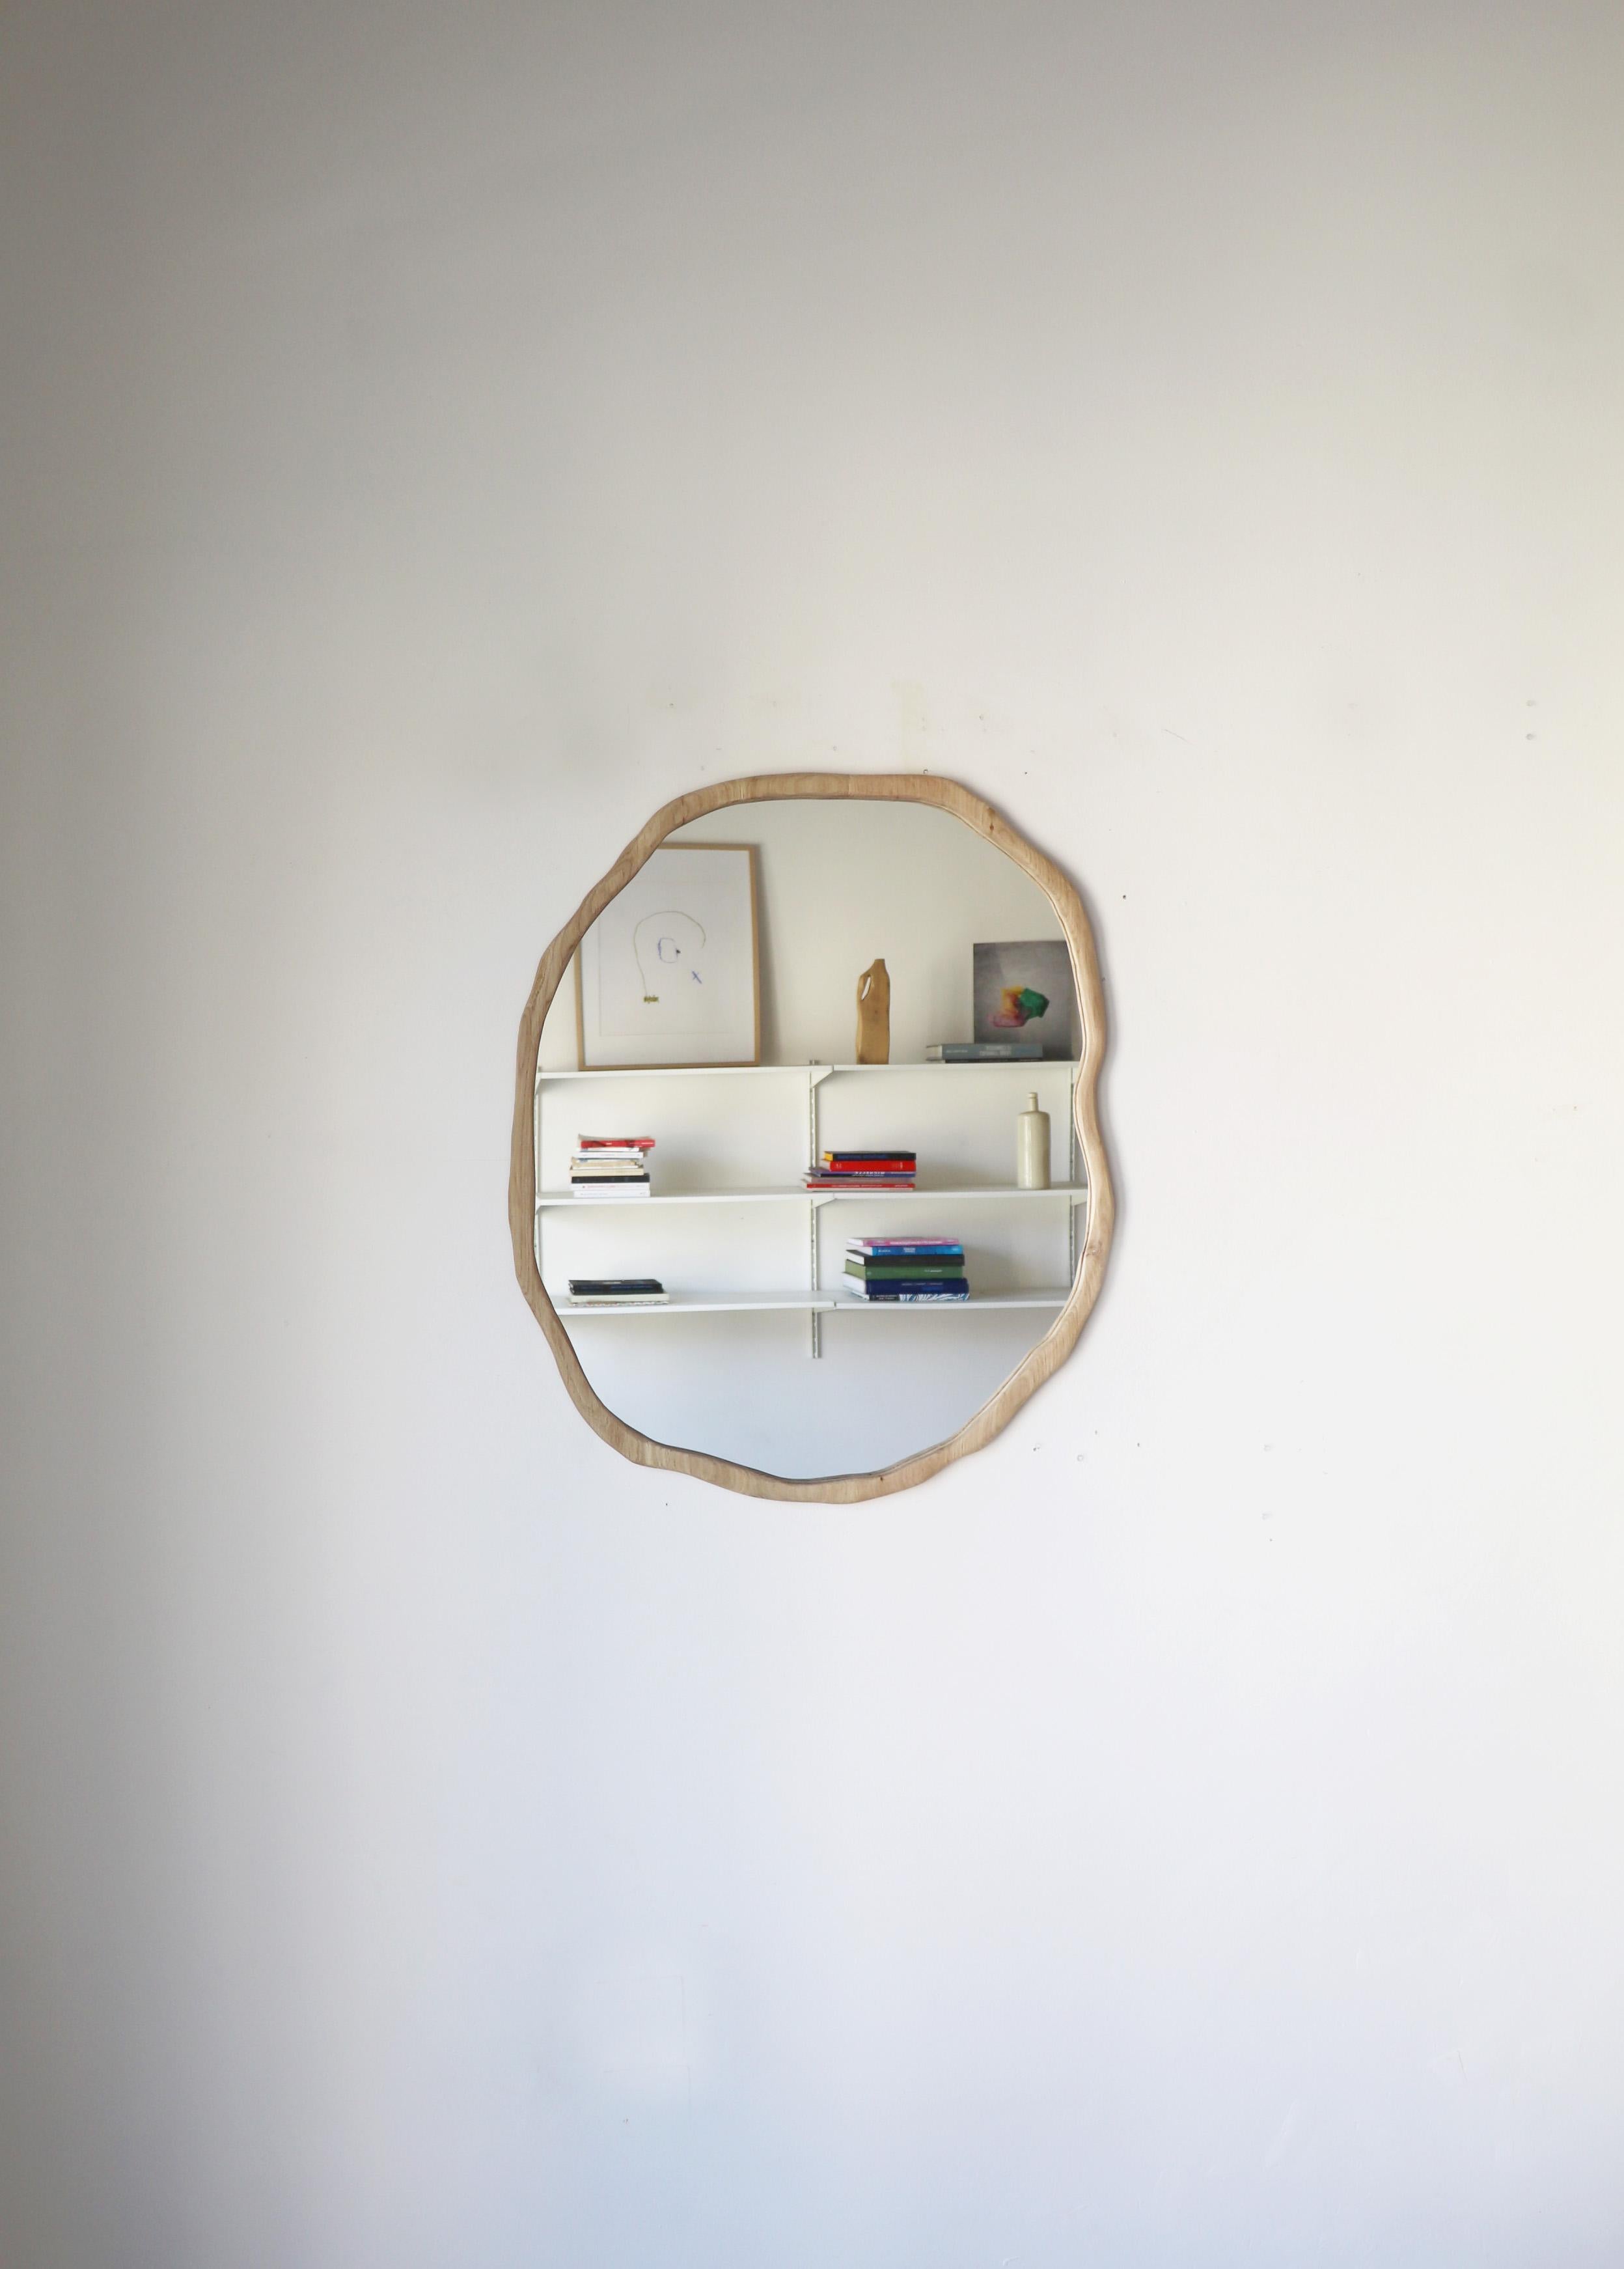 Large Light Varnish Ondulation Mirror by Alice Lahana Studio
Every mirror is unique. The shape slightly varies from edition to edition.
Dimensions: 60x70 cm
Materials: Oak.
Available finishing: Dark and light varnish

The Ondulation mirror is